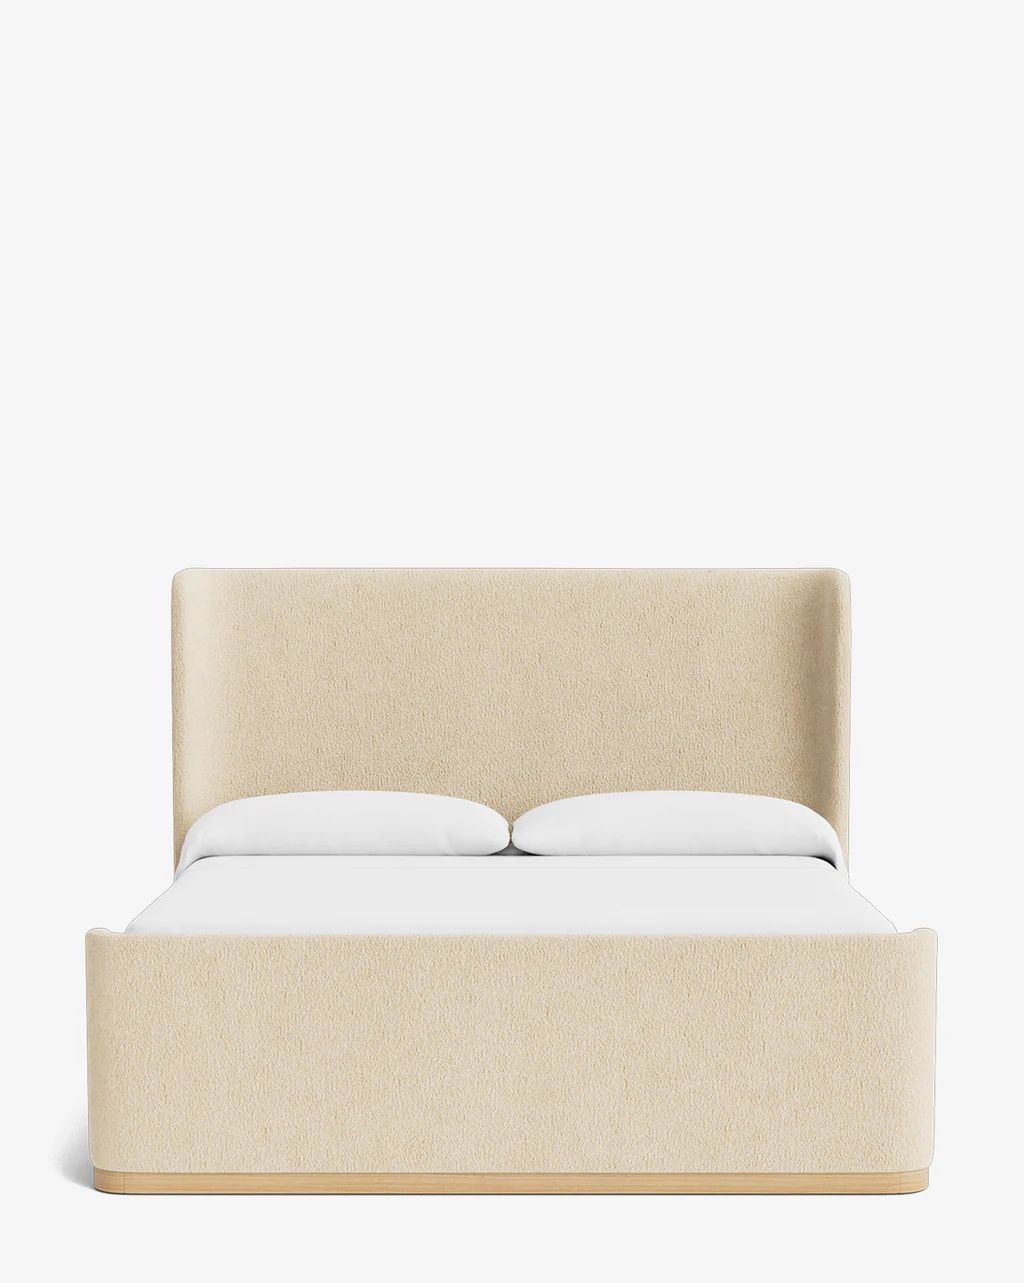 Denning Upholstered Bed (Ready to Ship) | McGee & Co. (US)